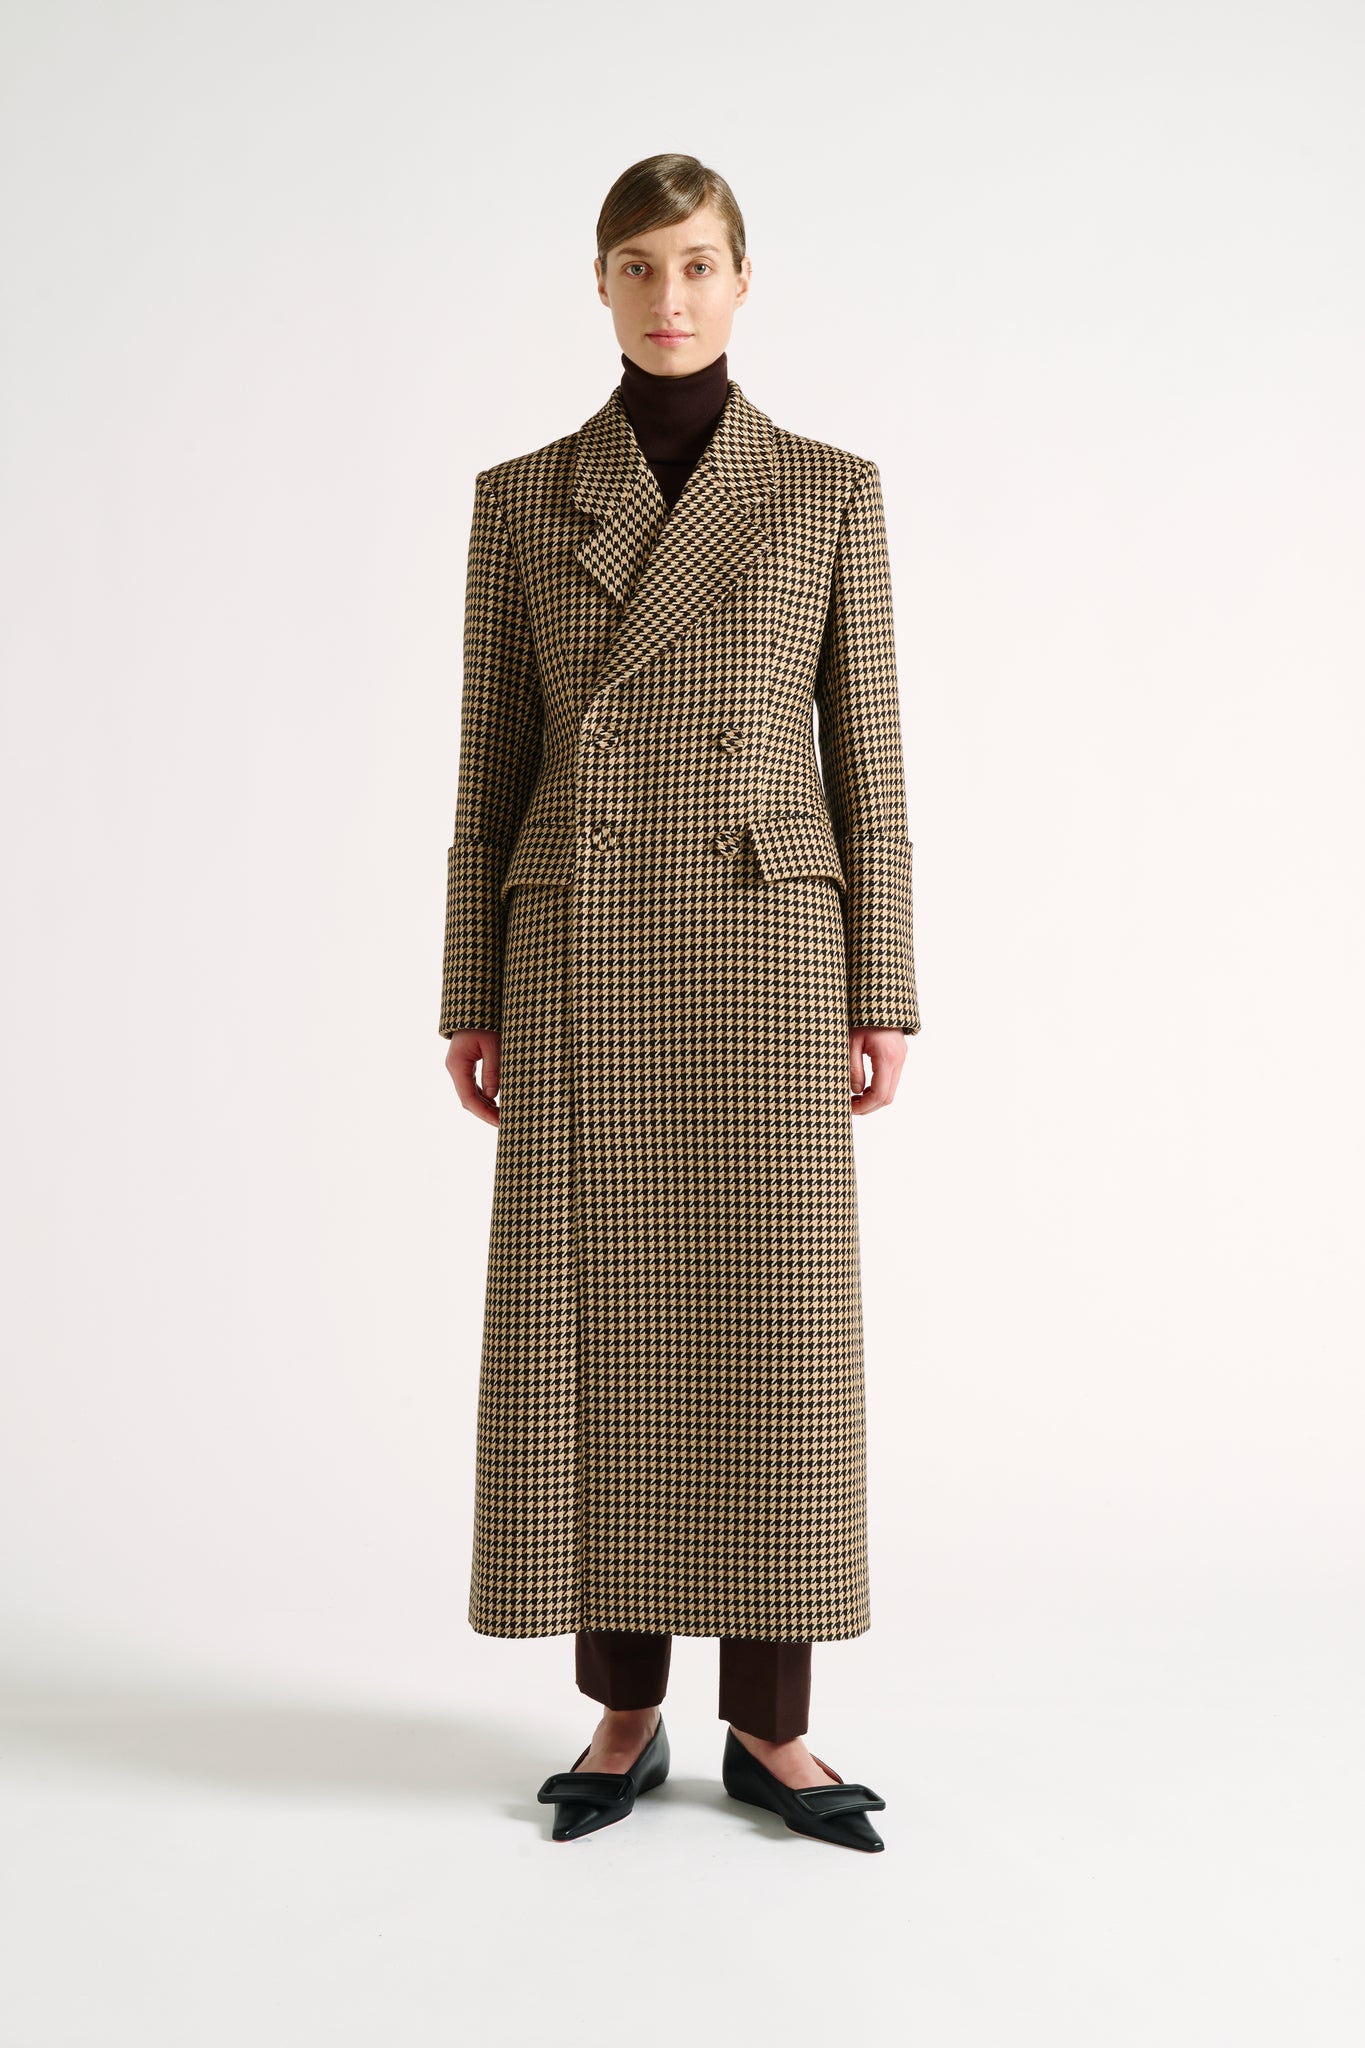 Maddy Coat | Camel Houndstooth Double Breasted Merino Wool Coat | Emilia Wickstead